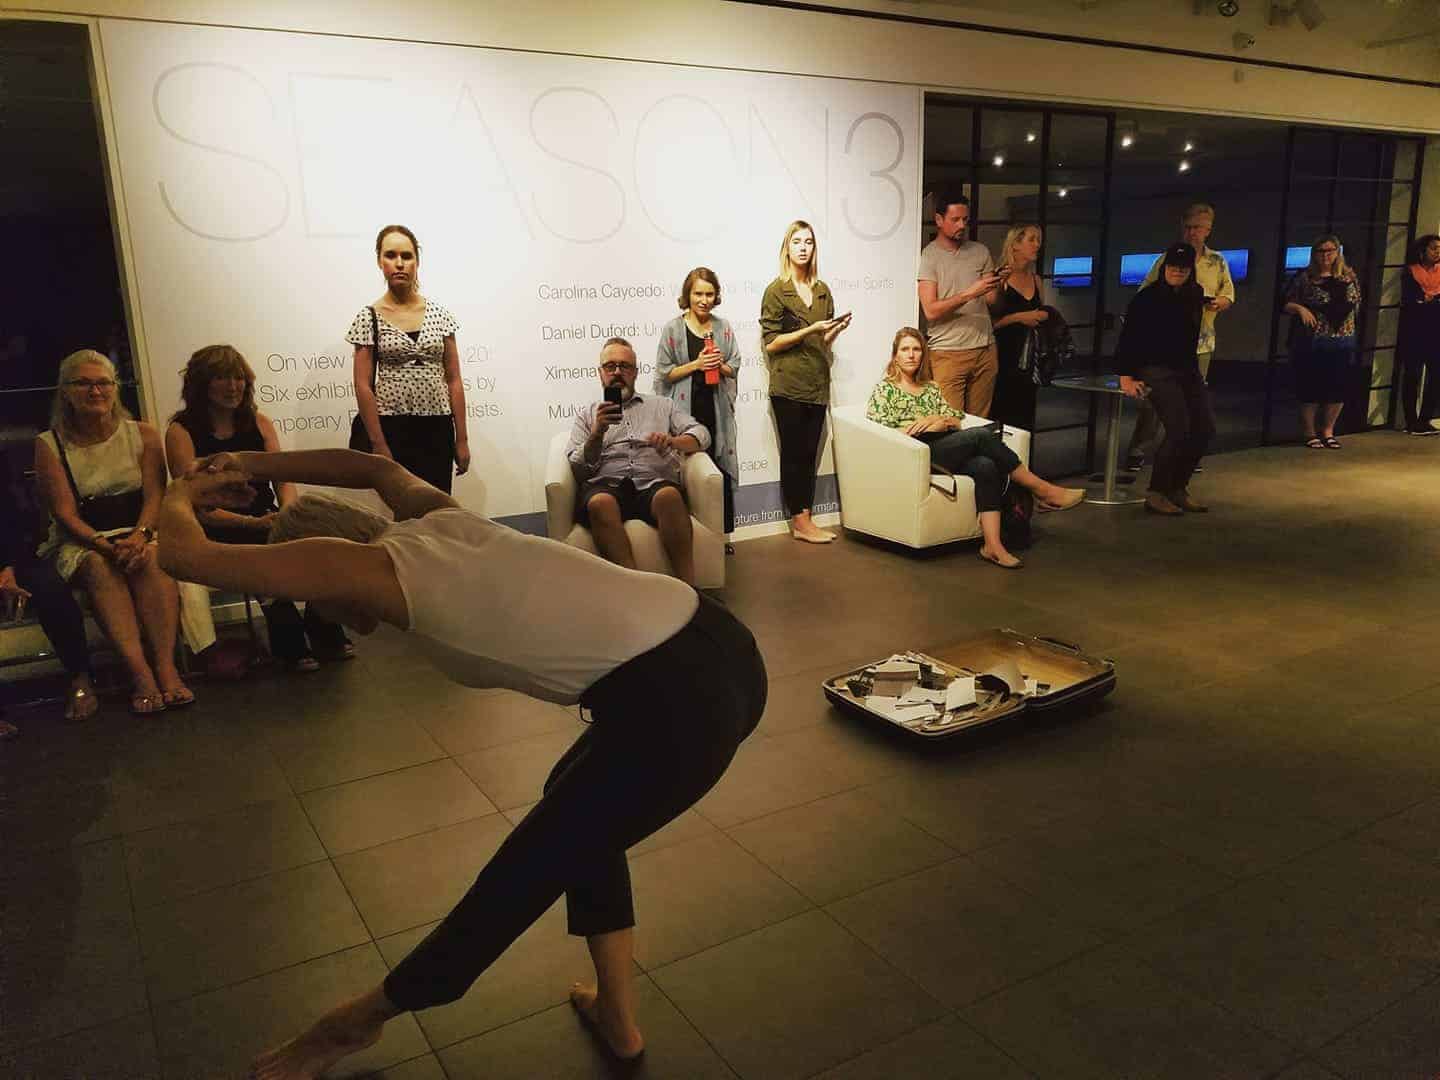 Salon attendees treated to an arresting solo dance piece by Re:BorN Dance Interactive founder/head Boroka Nagy.